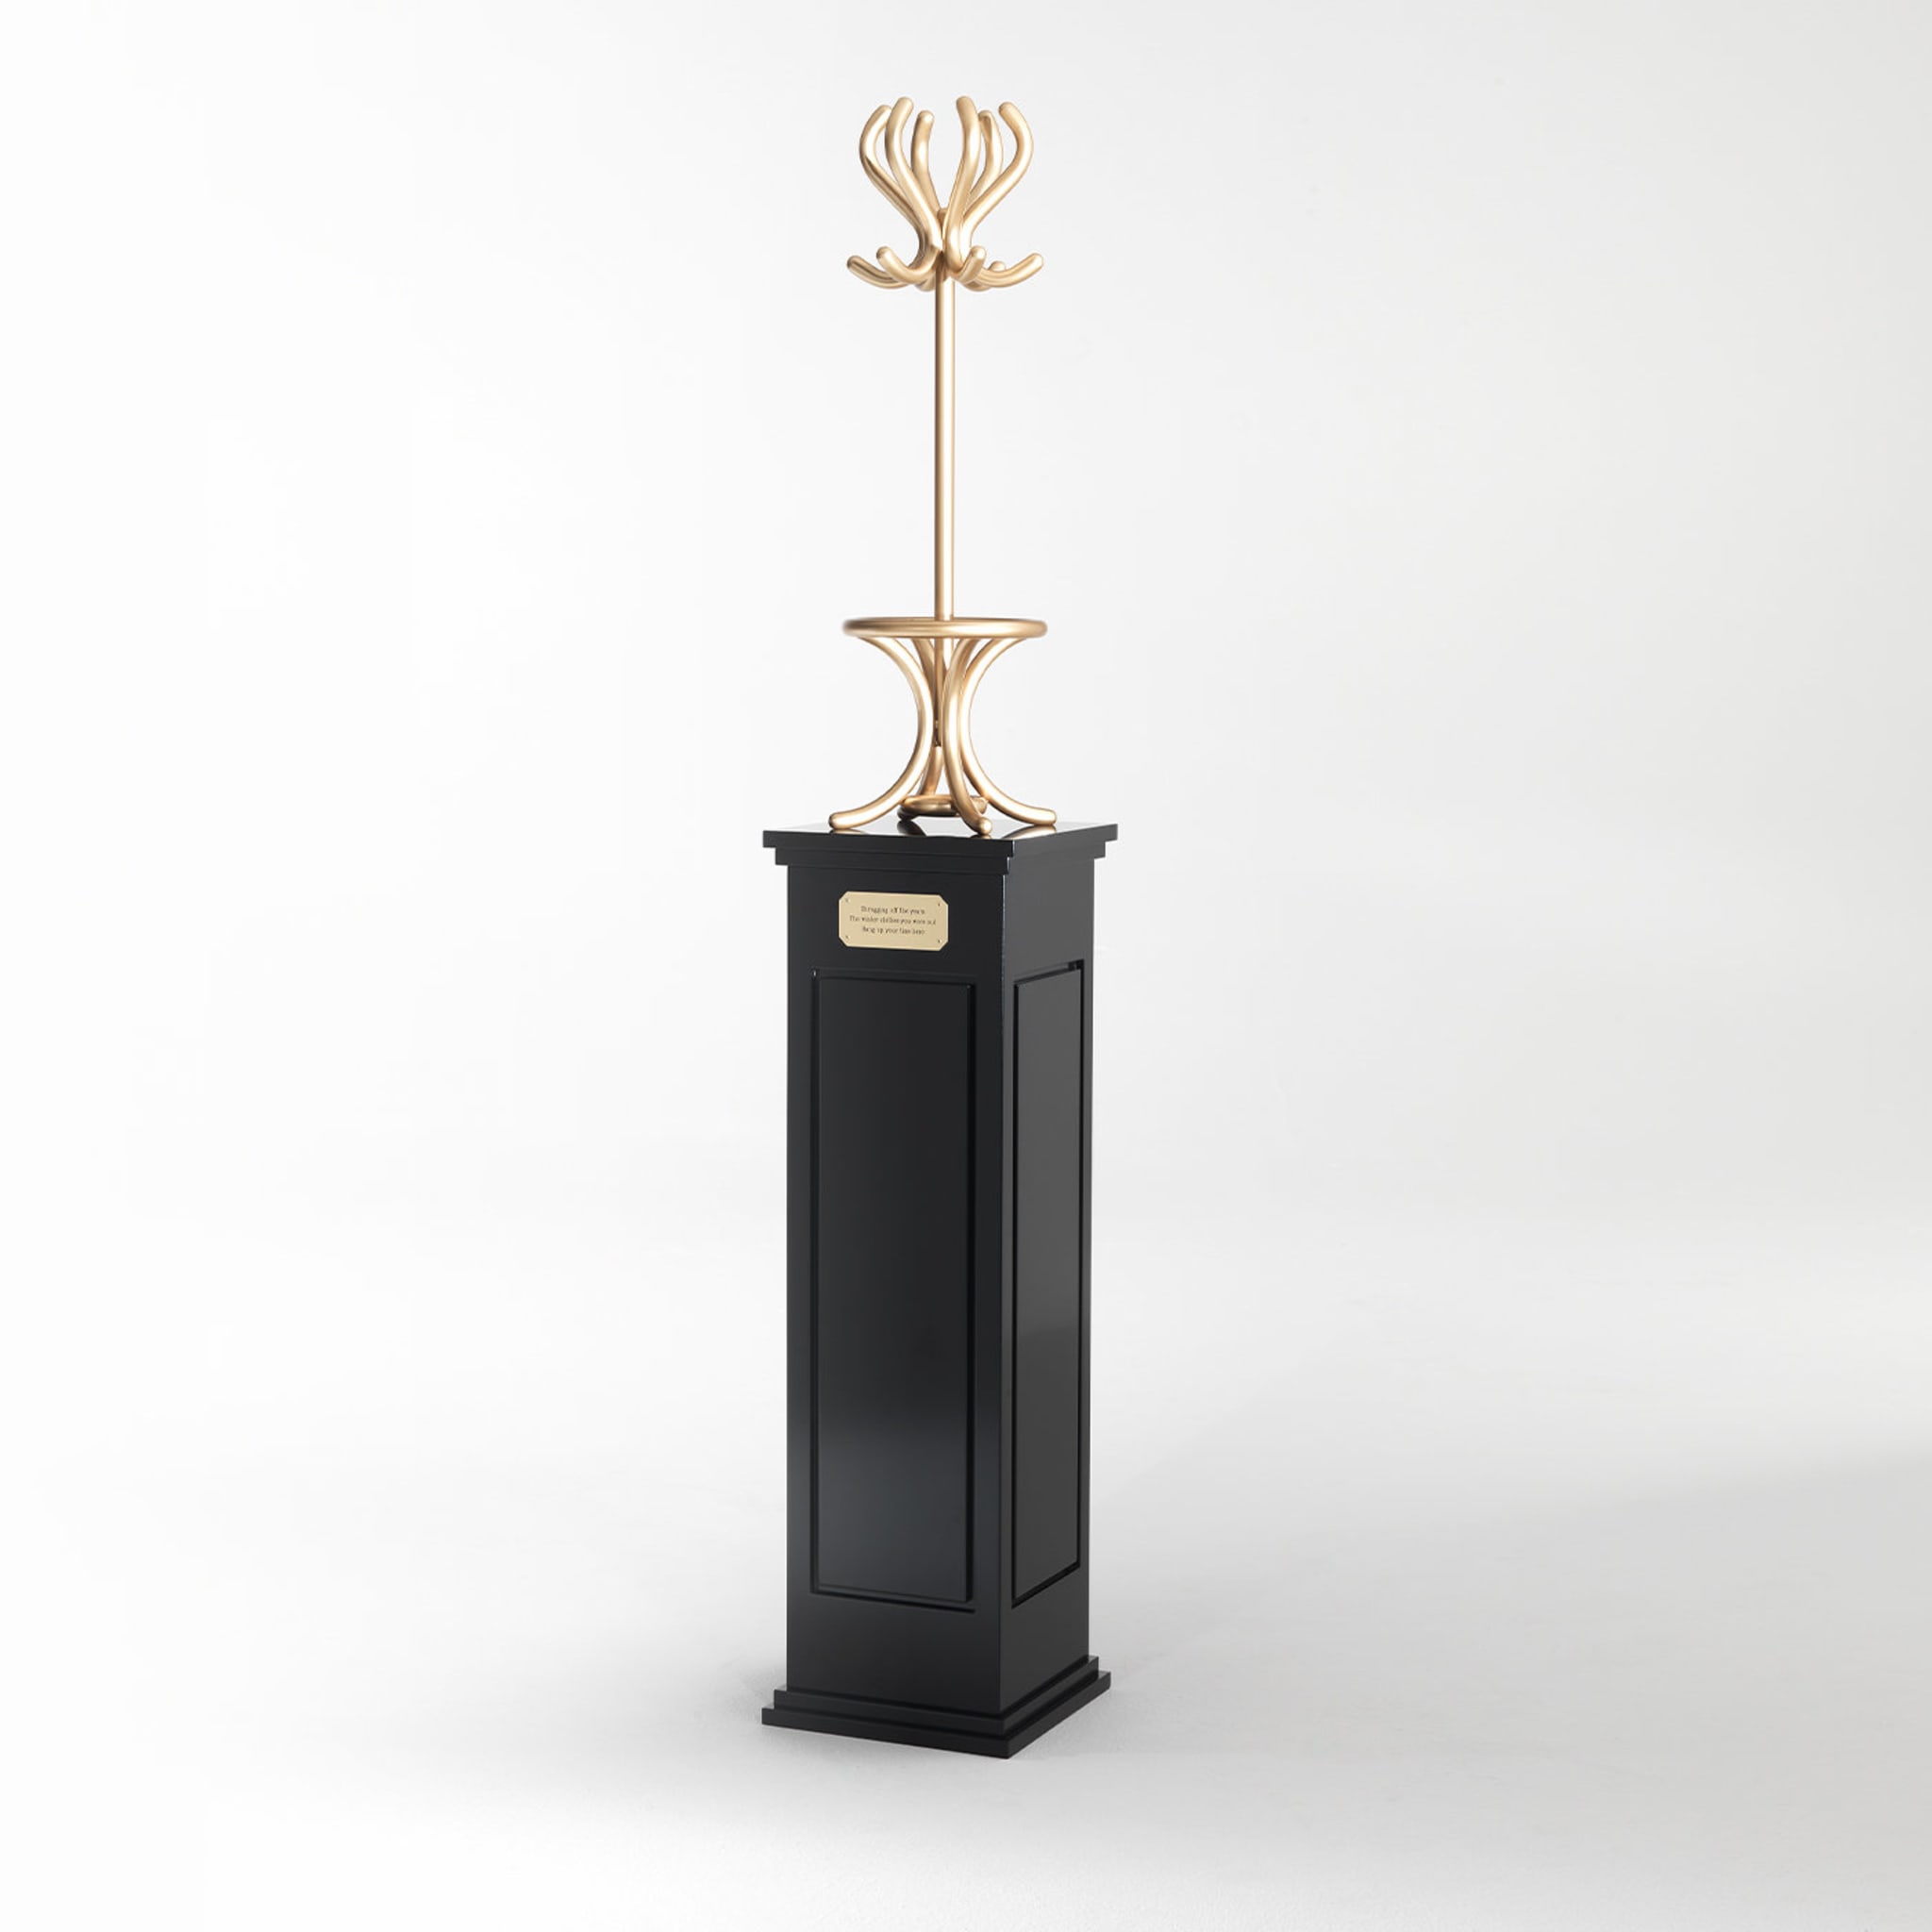 Galaver Hat and Coat Stand by Emanuele Magini - Alternative view 2